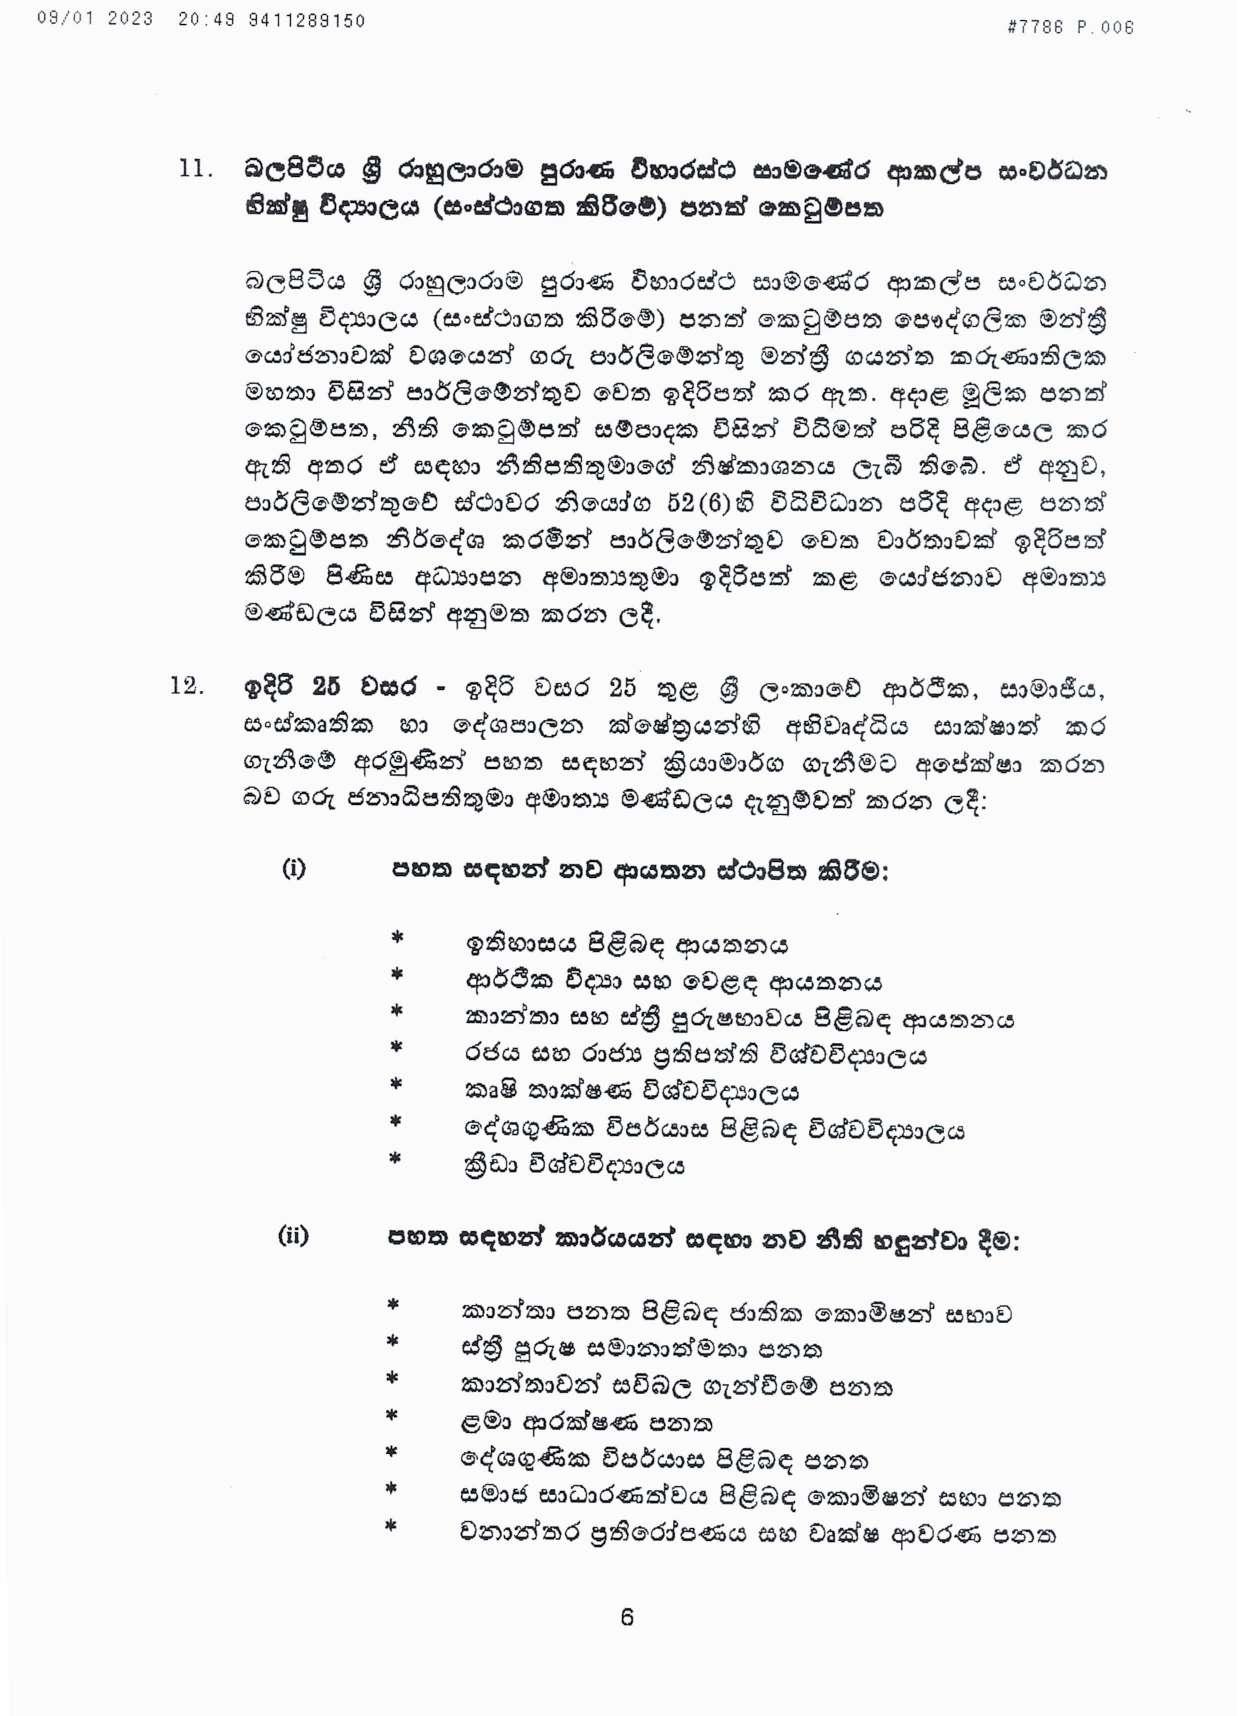 Cabinet Decision on 09.01.2023 page 006